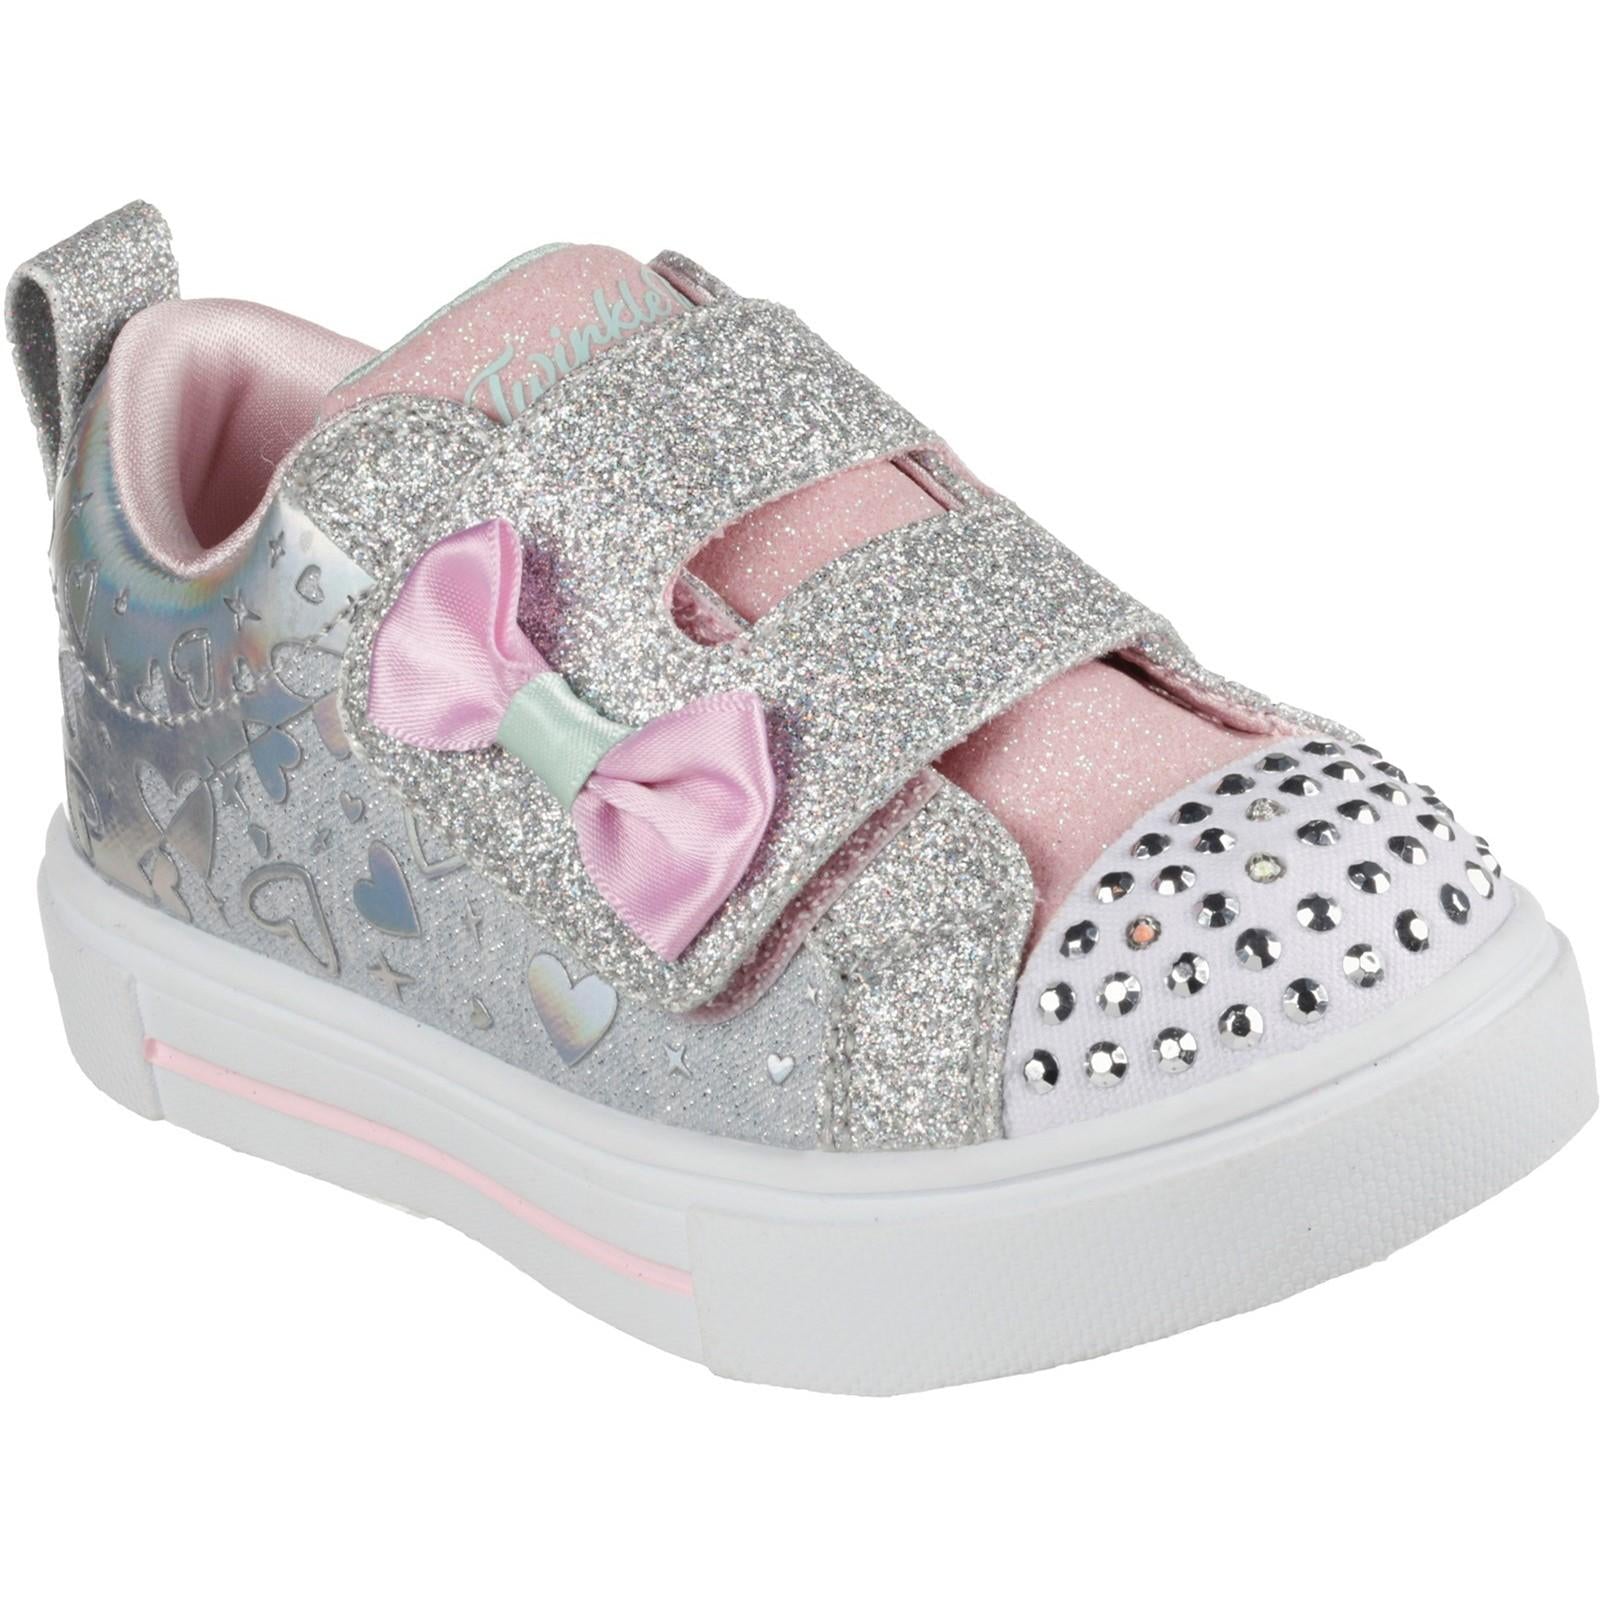 Skechers Twinkle Sparks Heather Charmer Trainers